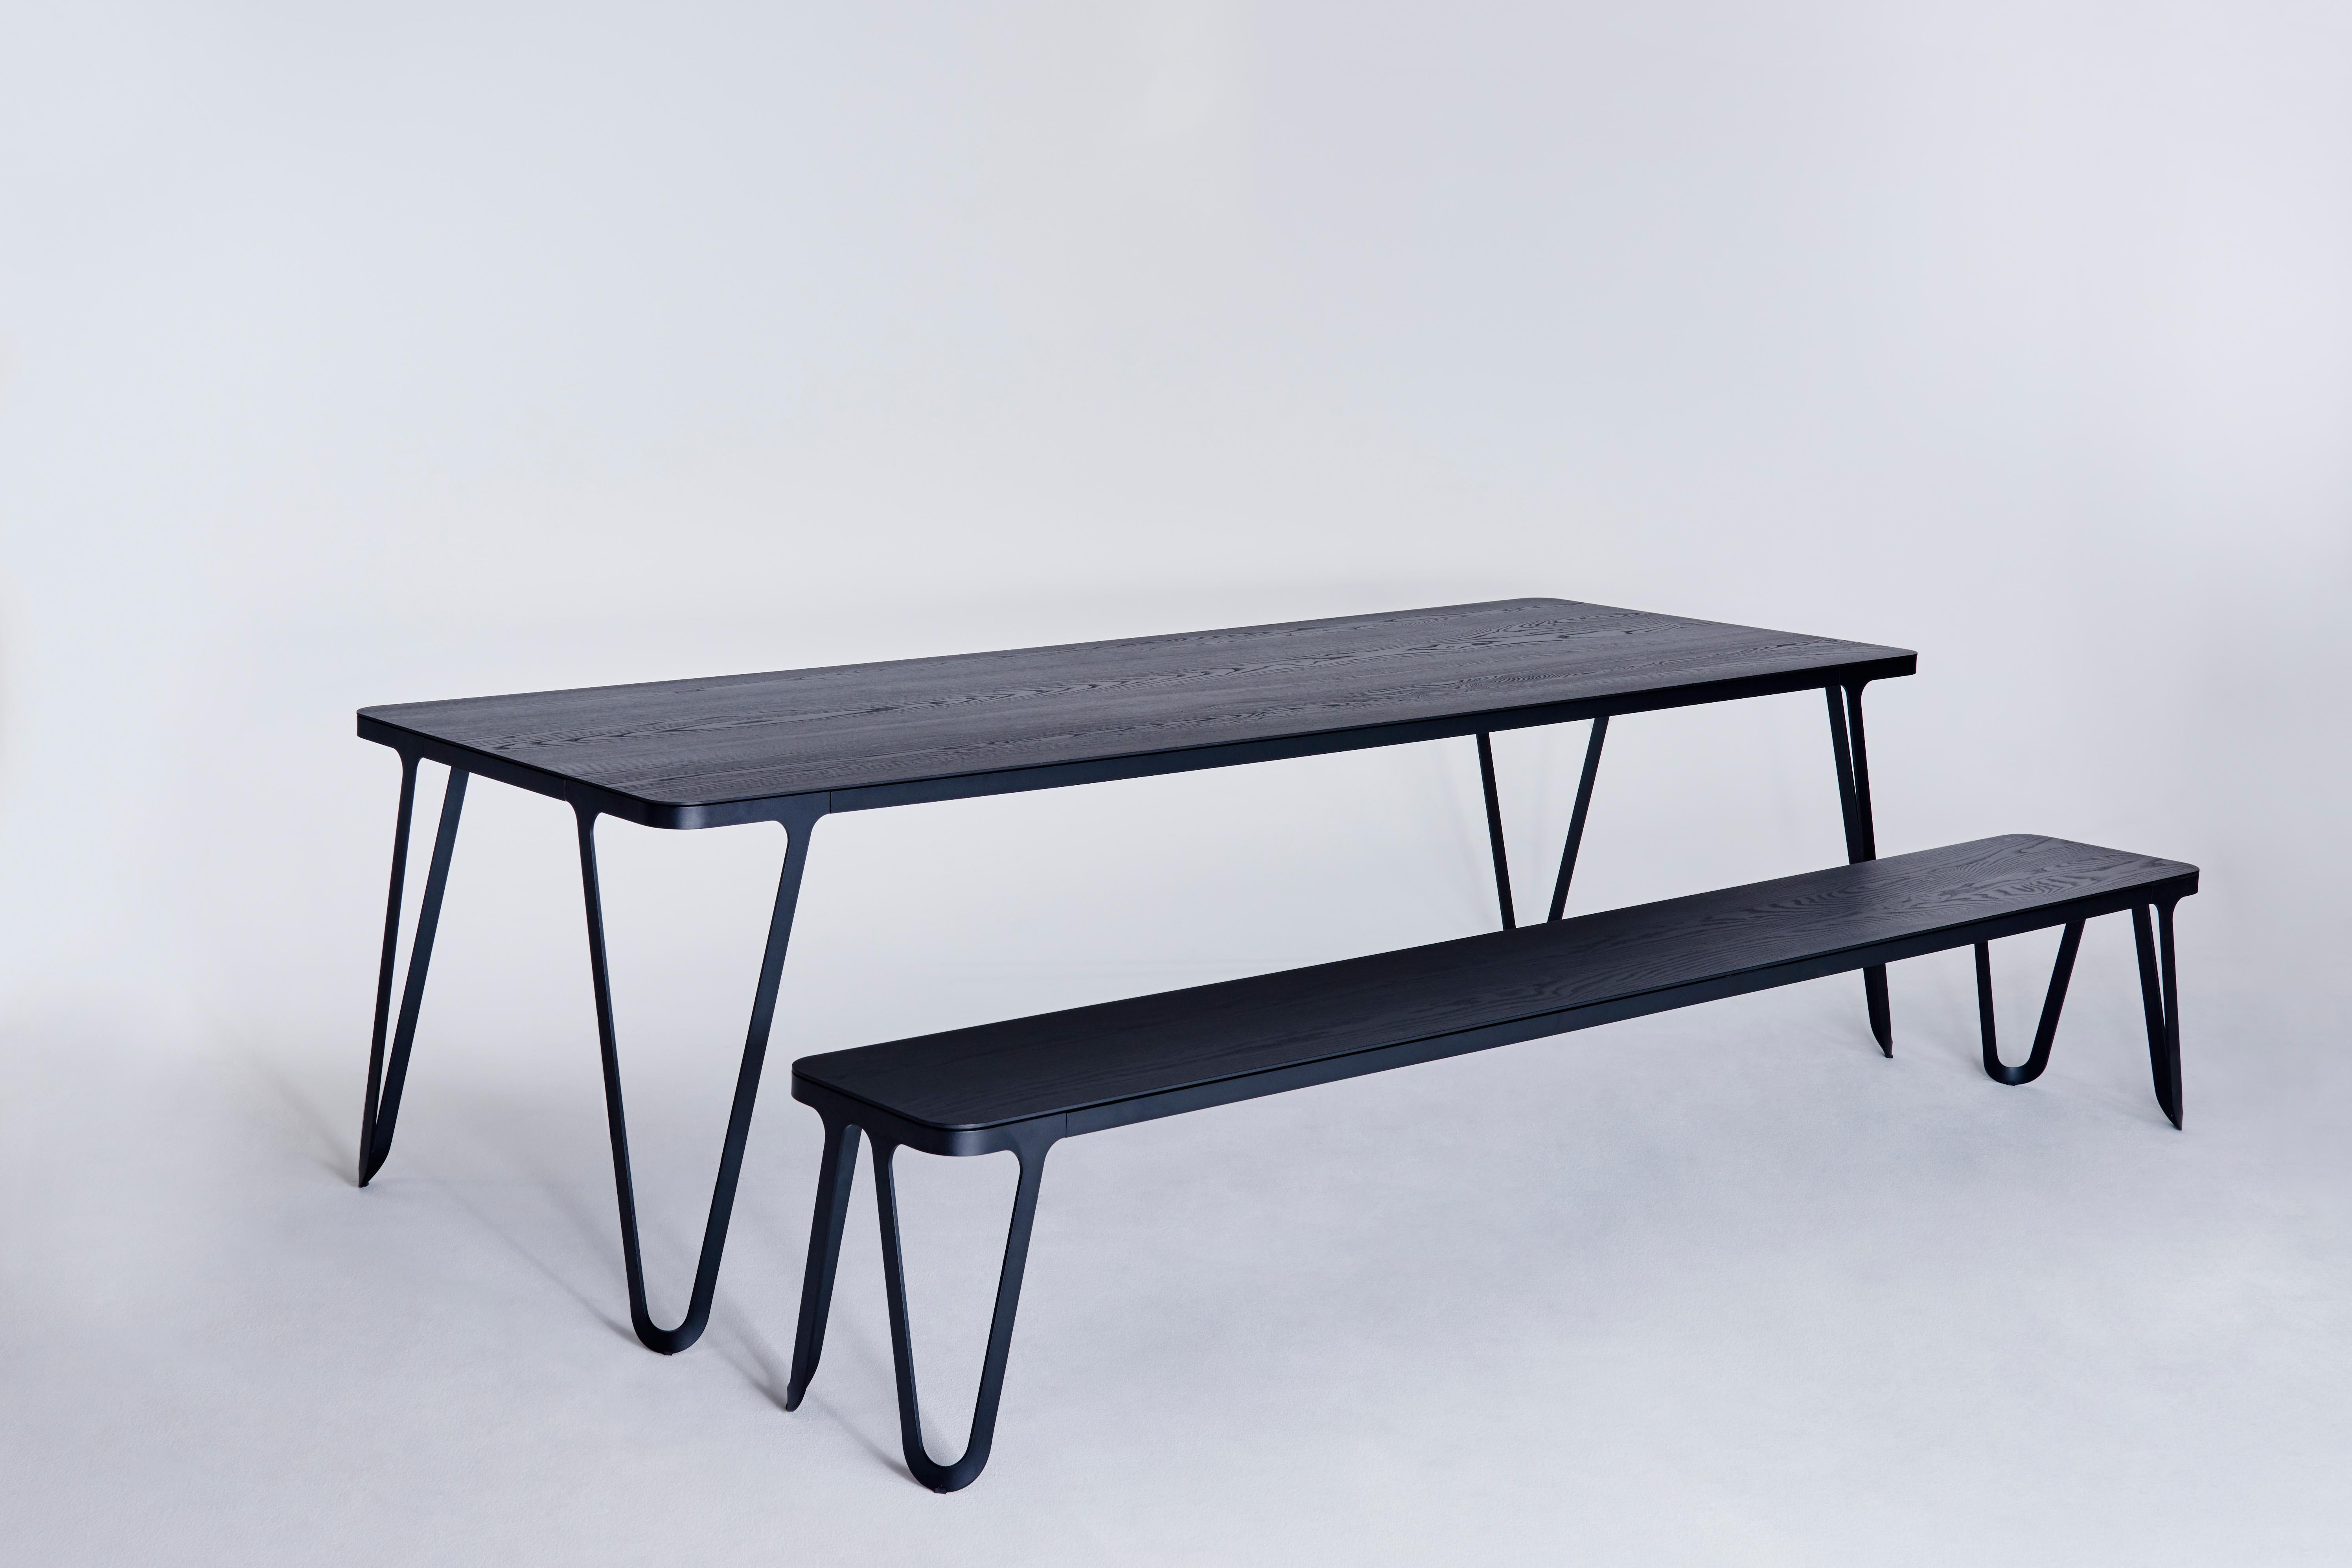 Loop table 160 ash by Sebastian Scherer.
Dimensions: D 160 x W 90 x H 74 cm.
Materials: Oak, Aluminium, wood.
Weight: 47.1 kg.
Also available: Colours:Solid wood (matt lacquered or oiled): black and white stained ash / natural oak / american